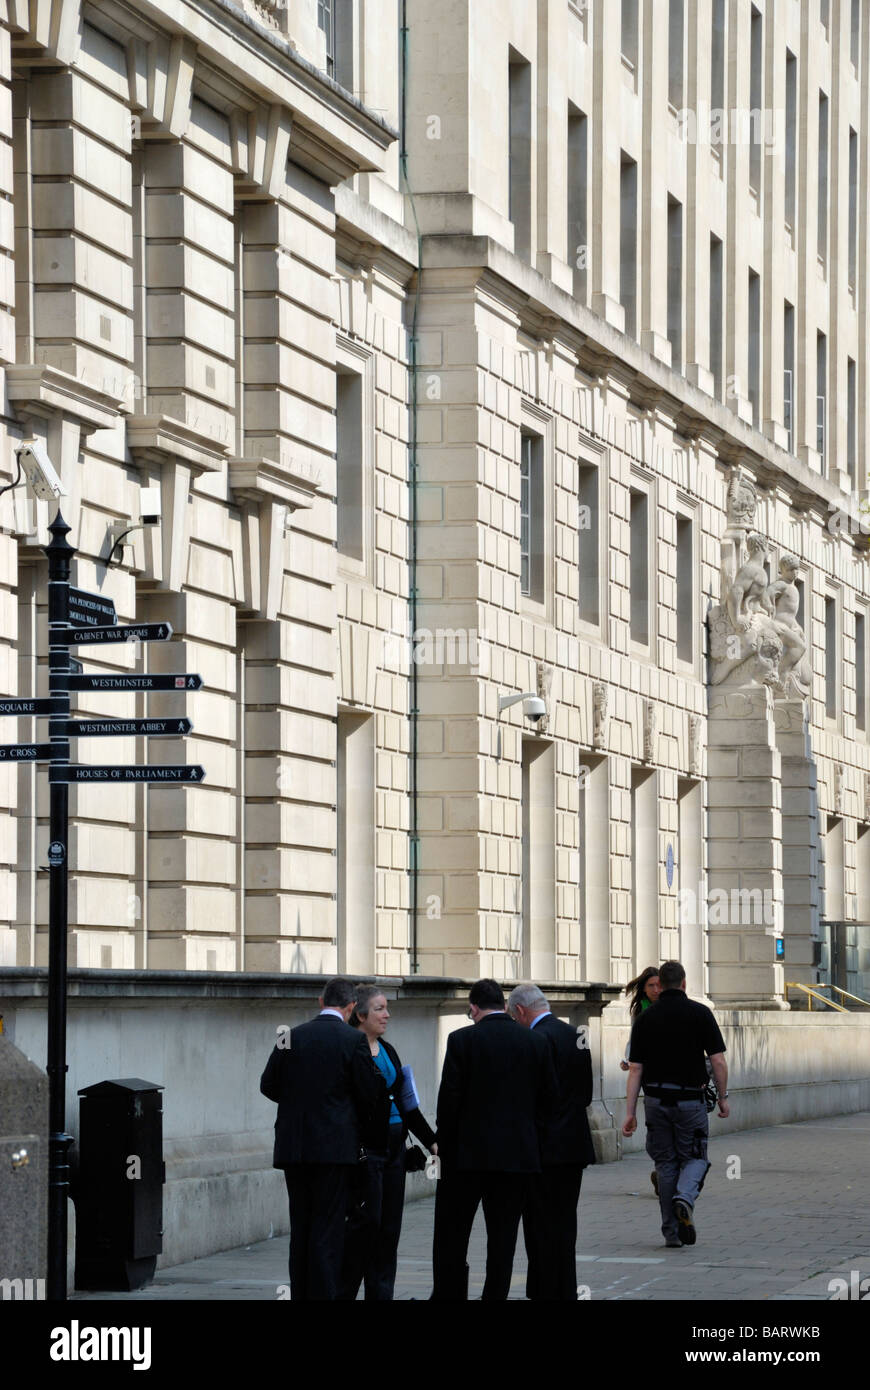 DEFRA government building in Whitehall Place London Stock Photo